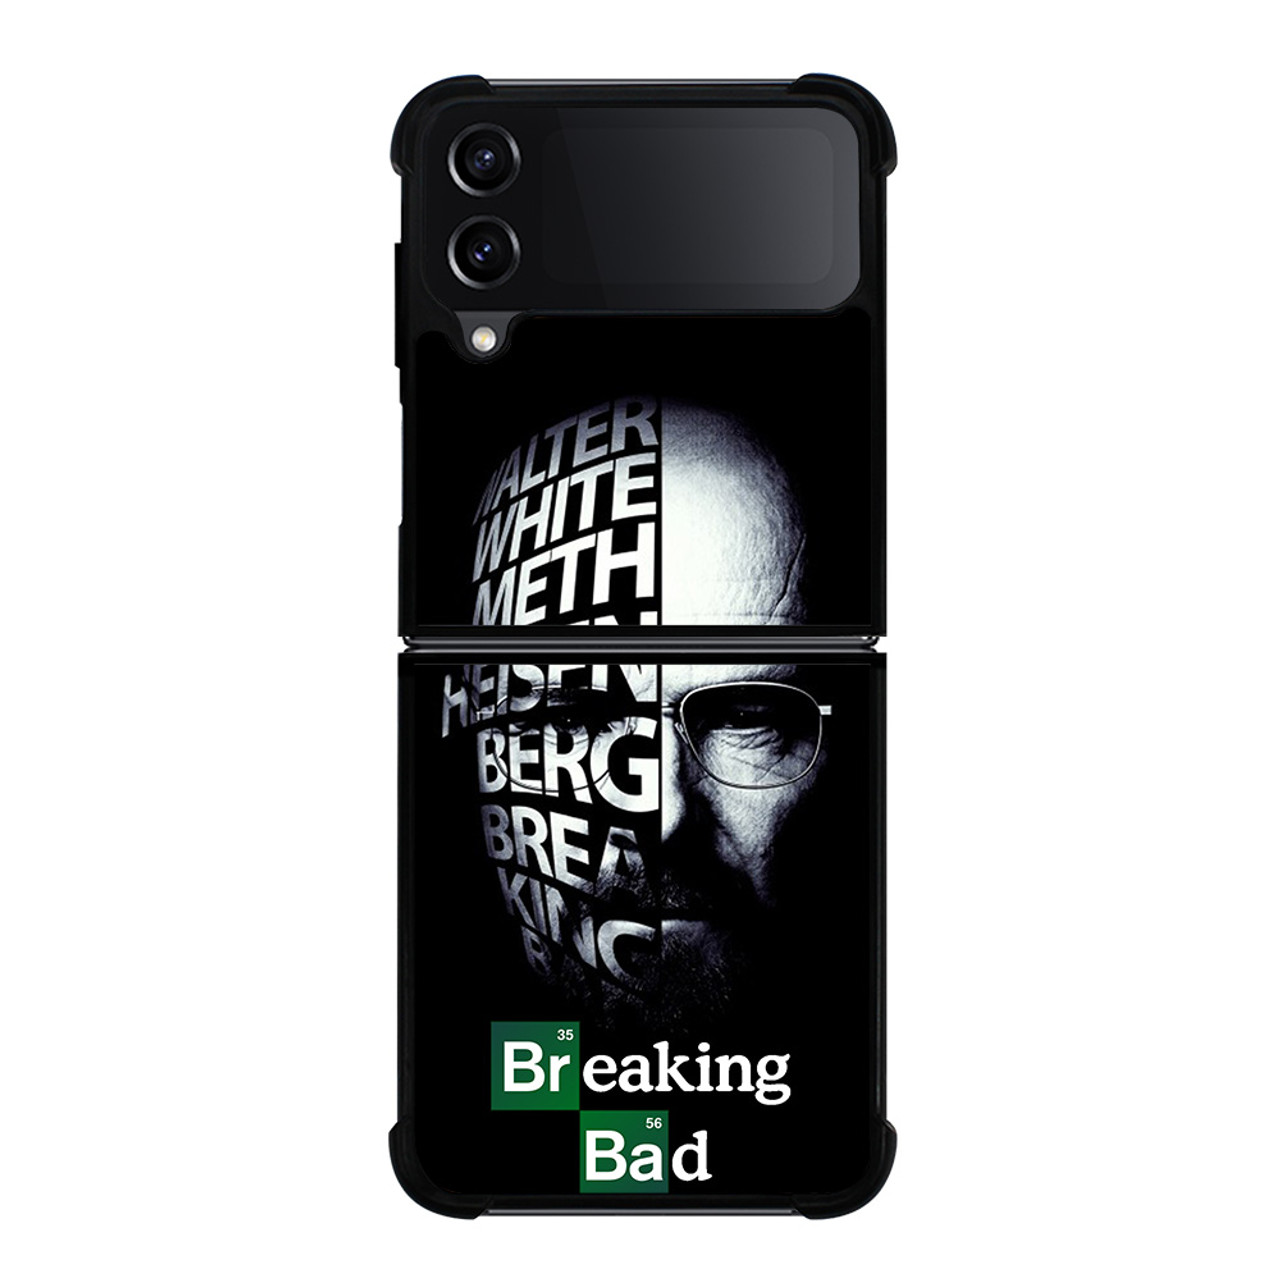 BREAKING BAD QUOTE Samsung Galaxy Z Flip 4 Case Cover